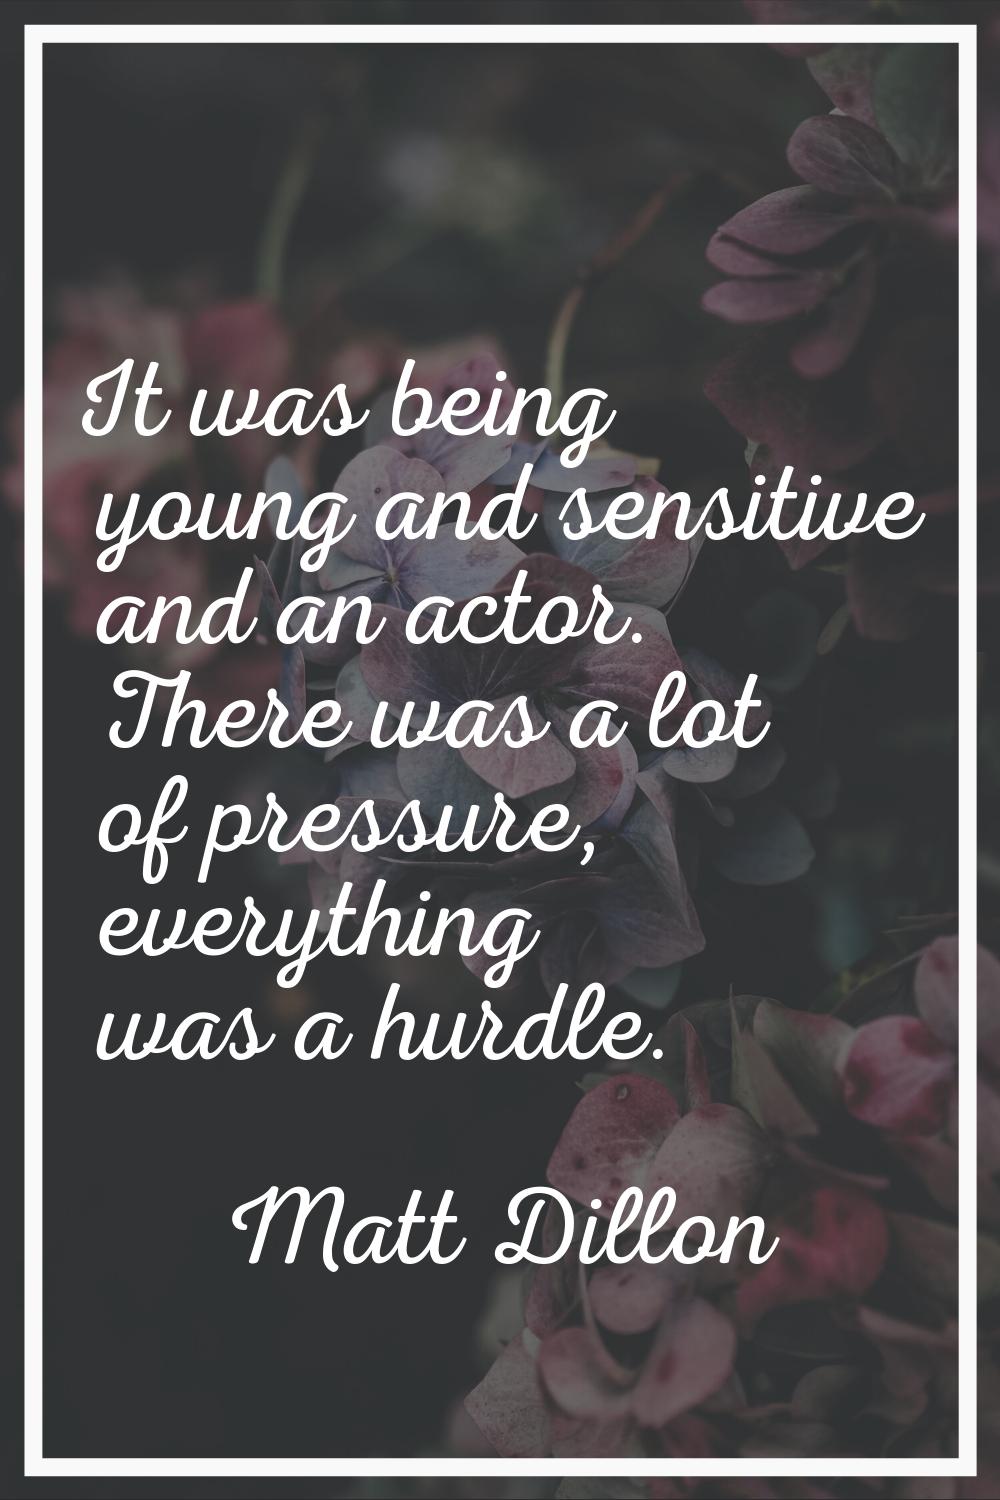 It was being young and sensitive and an actor. There was a lot of pressure, everything was a hurdle